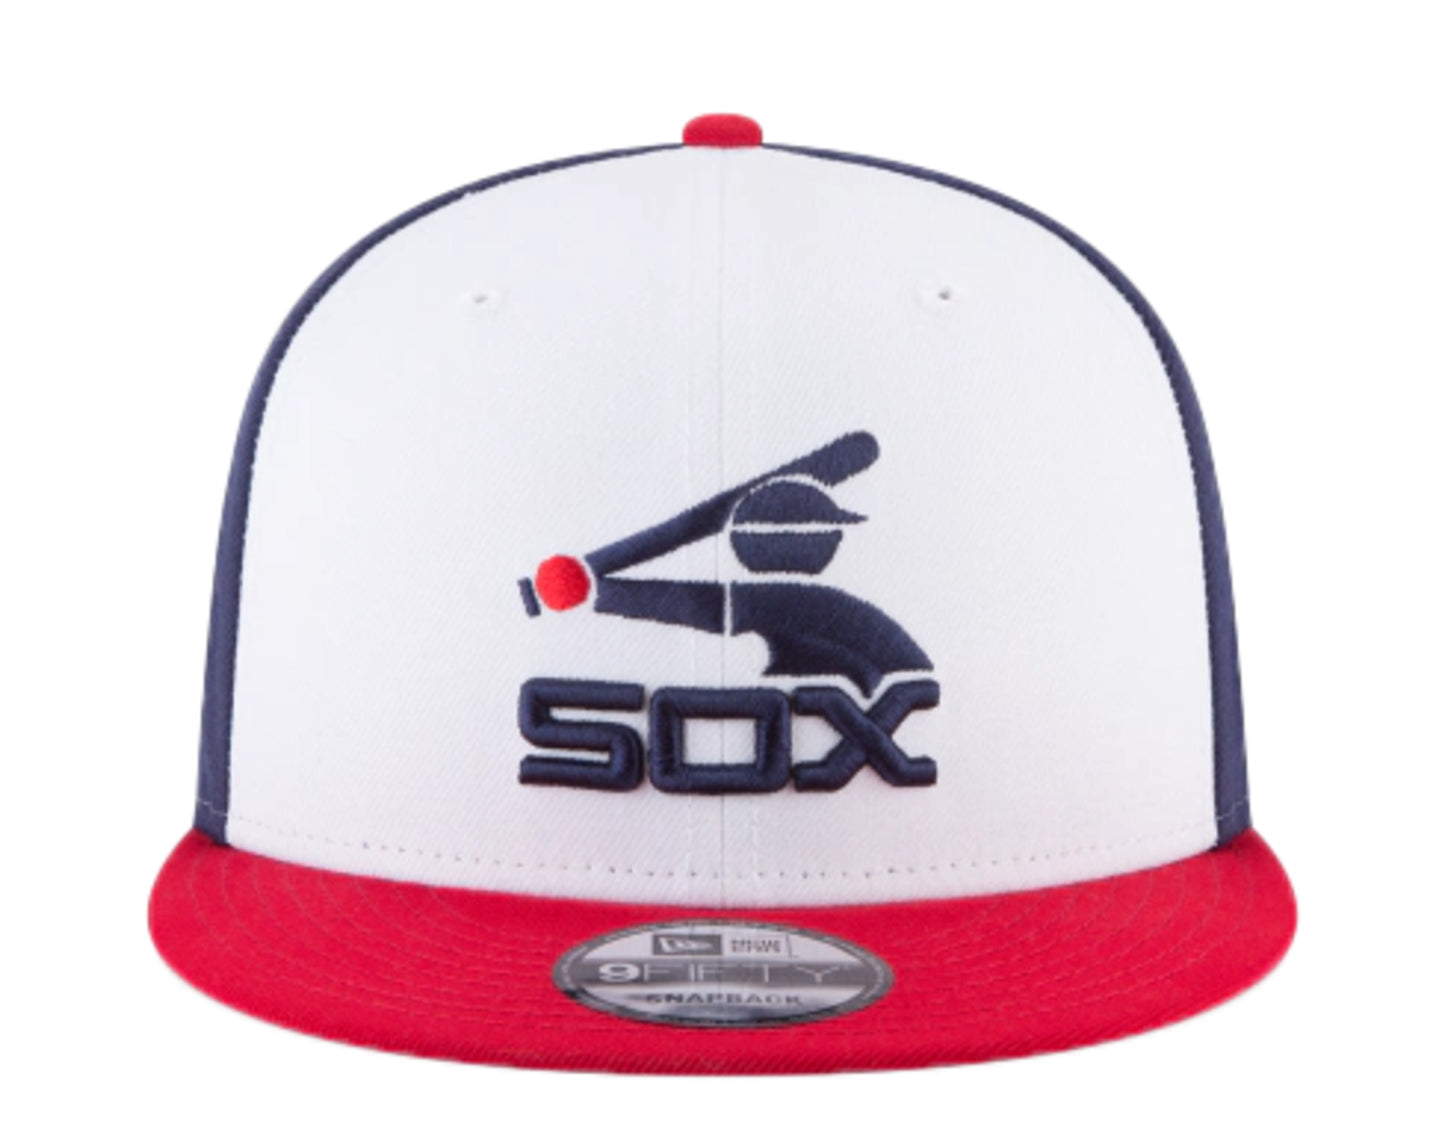 New Era 9Fifty MLB Chicago White Sox Cooperstown Basic Snapback Hat